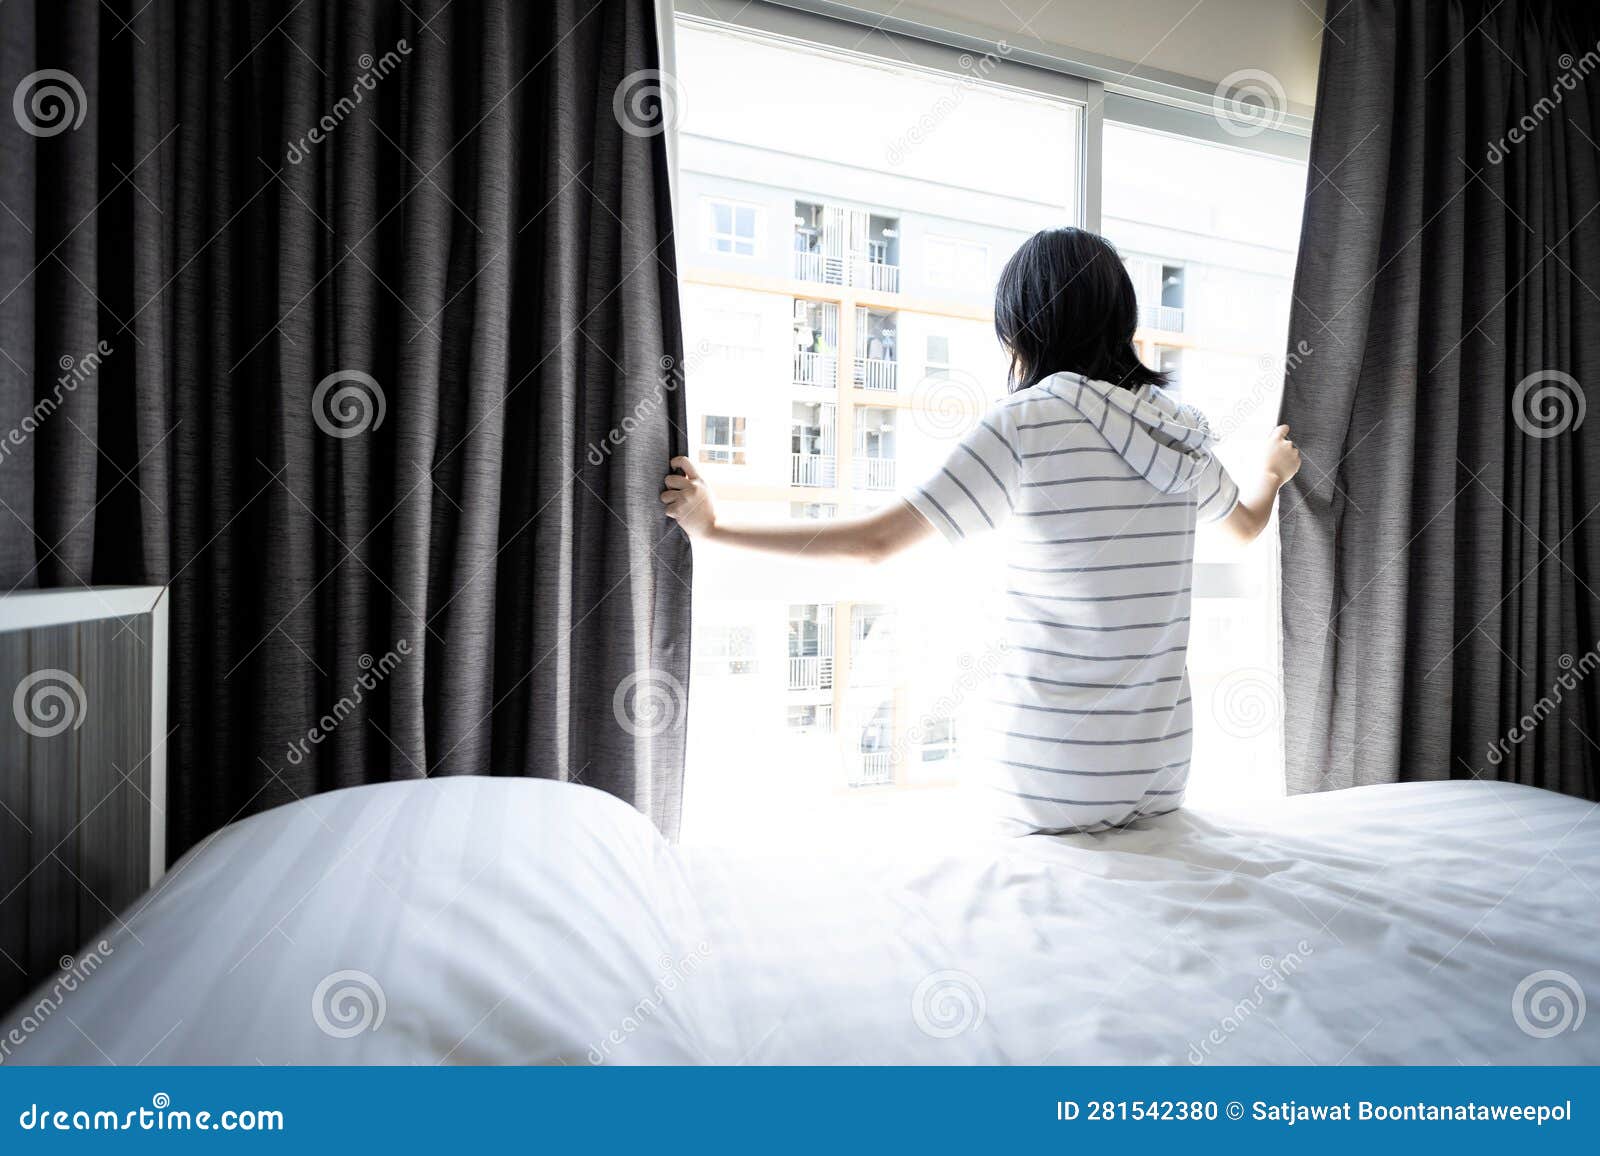 asian young woman opening curtain and window for hygienic,sunlight to enter her bedroom and air circulate freely in room at home,